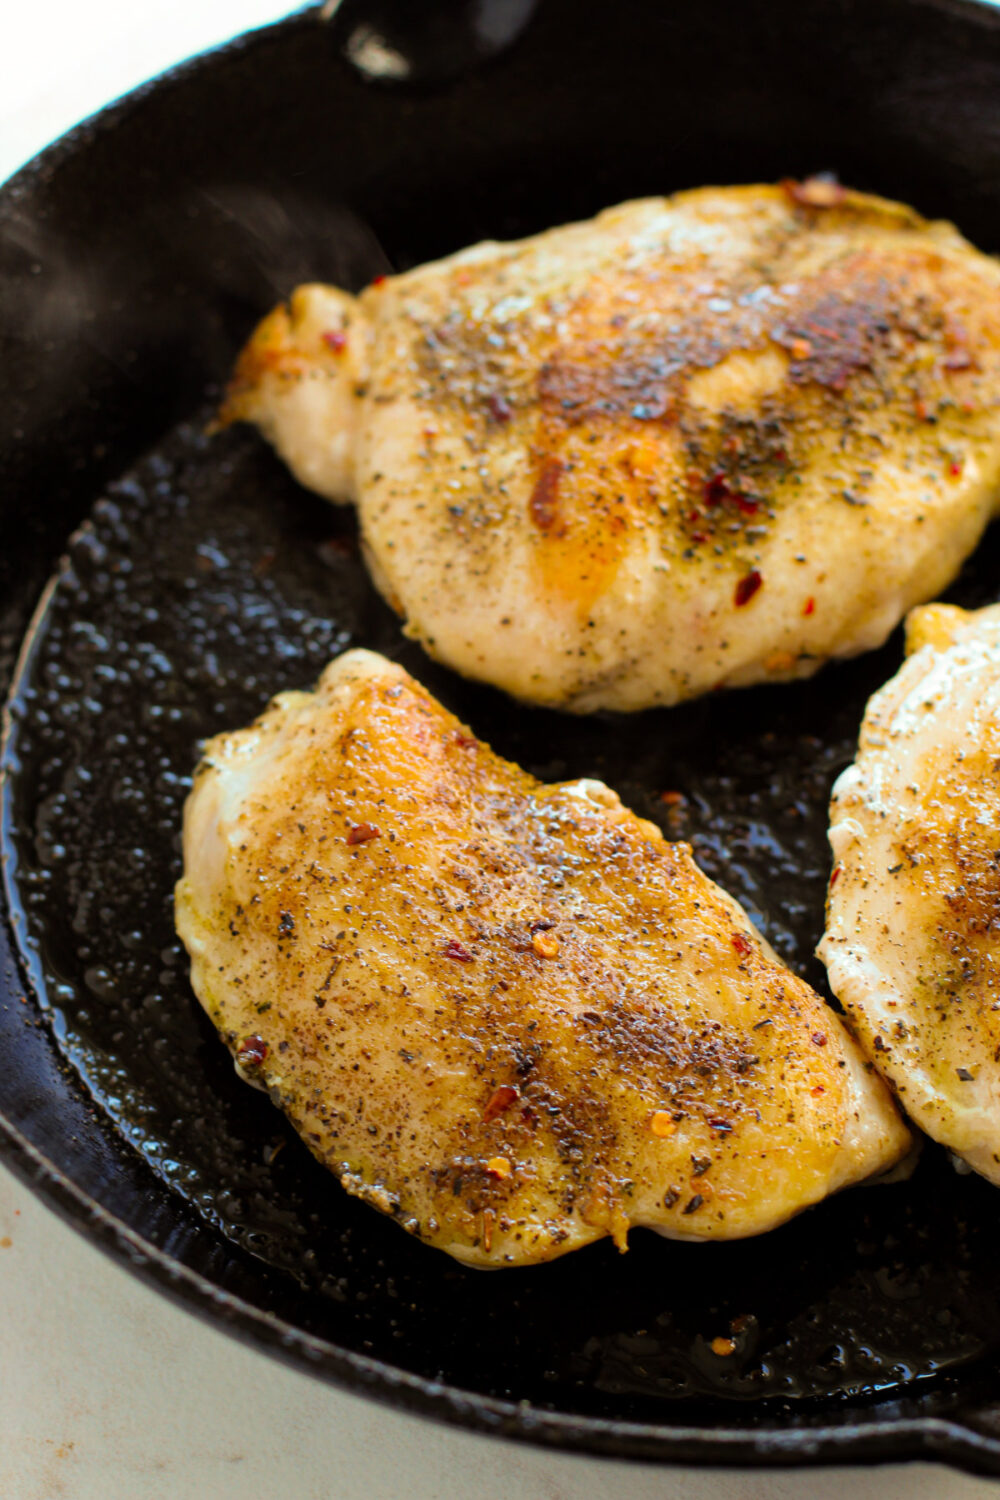 Chicken breasts in a skillet.